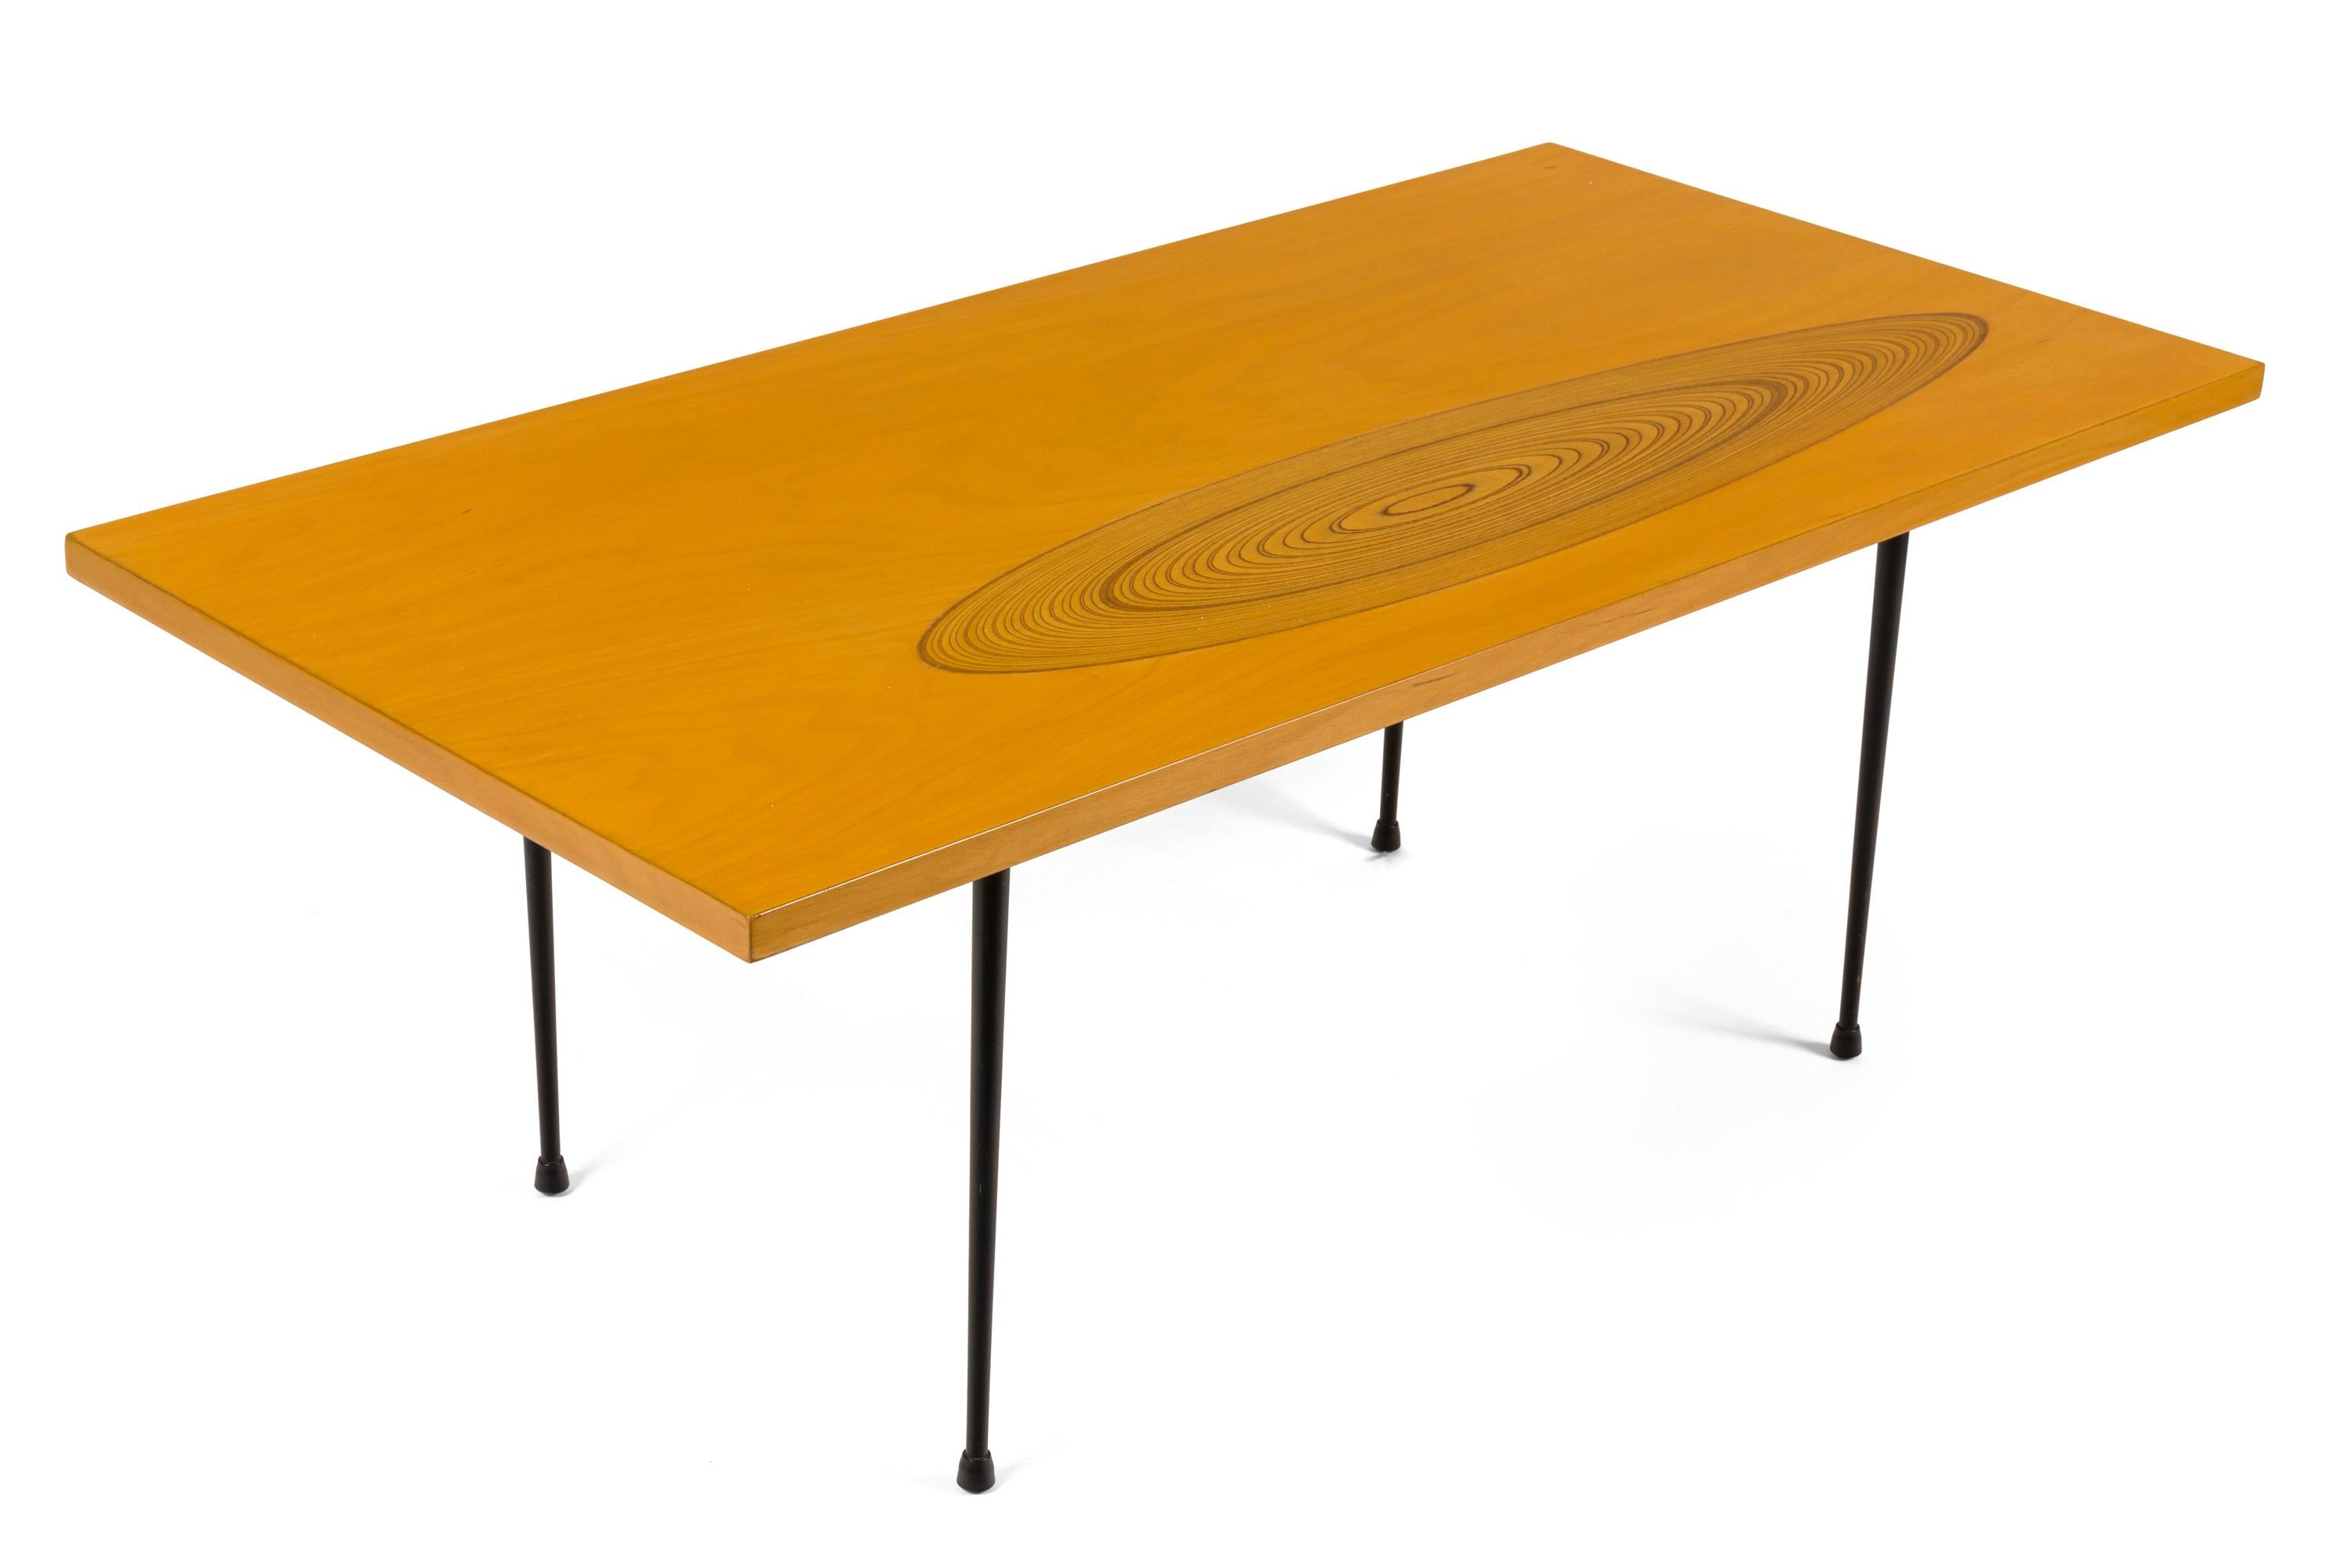 A remarkably distinctive table because of the absolutely beautiful inlaid technique Wirkkala is known for.